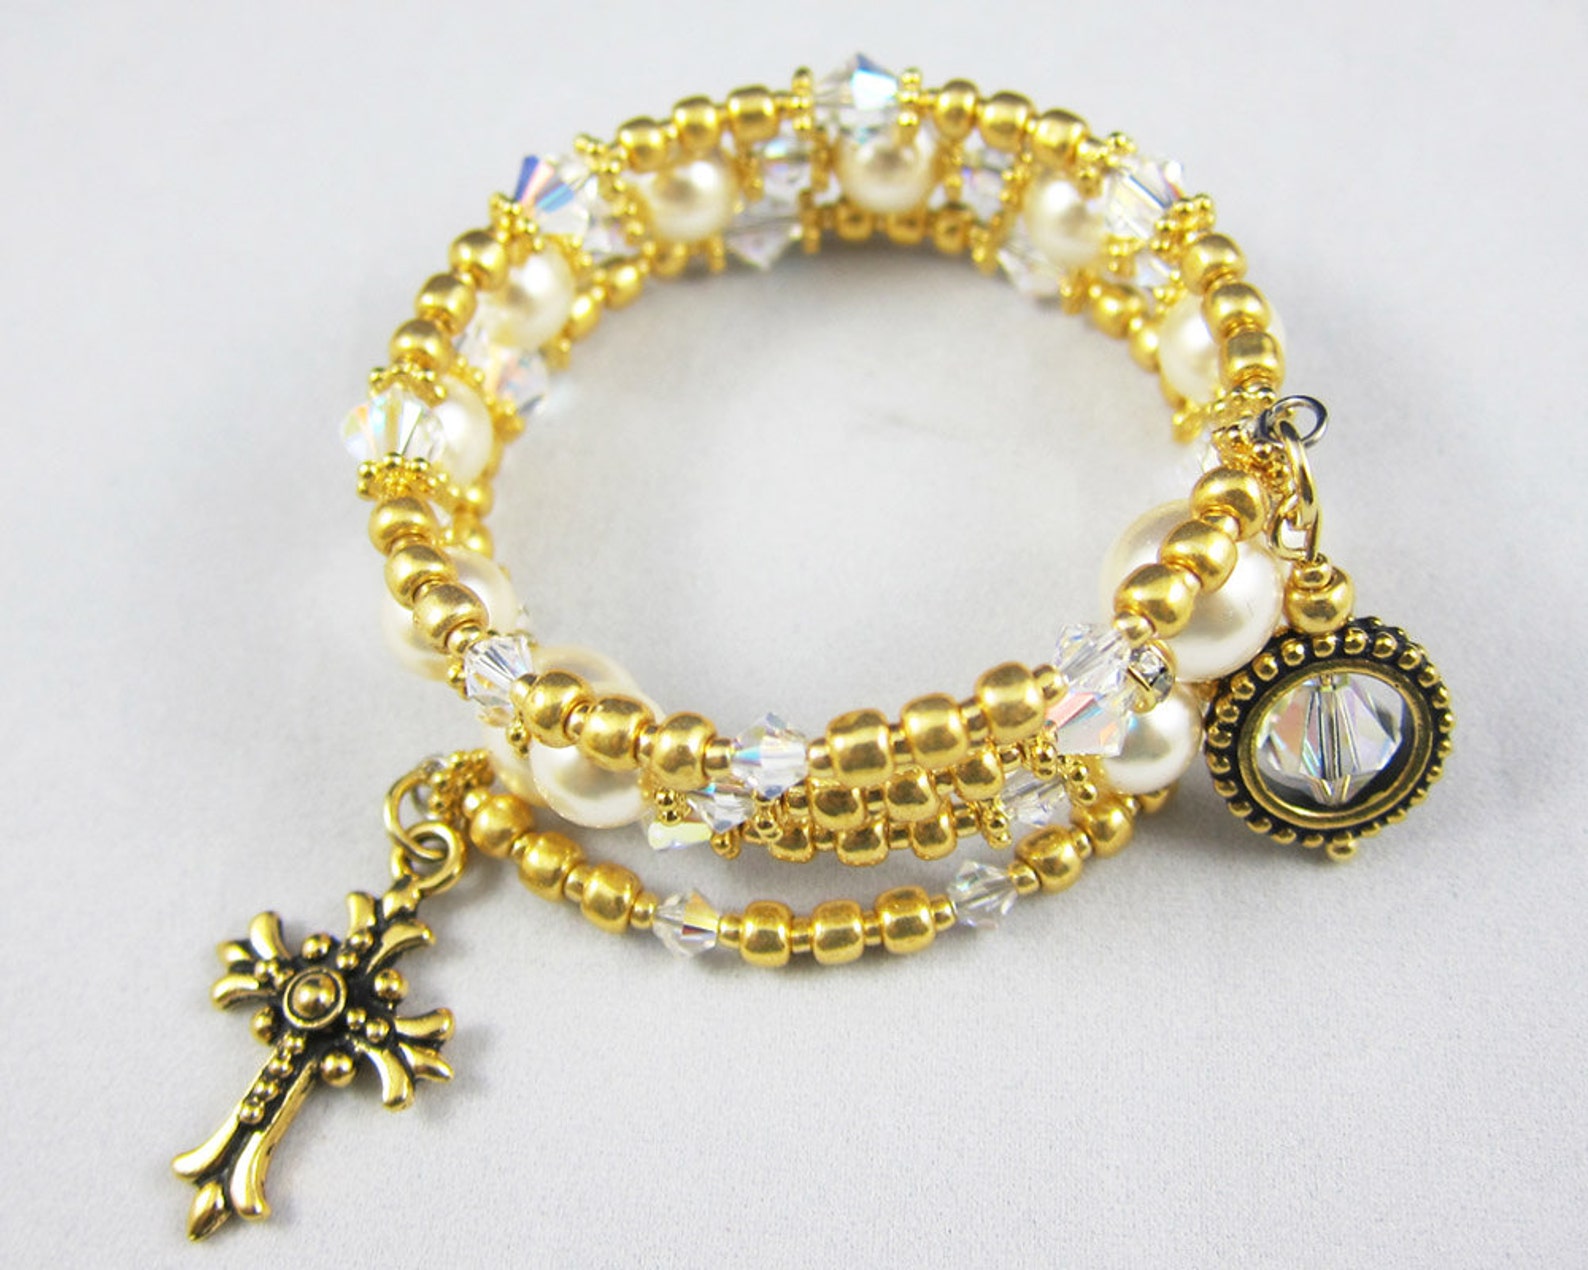 Golden Bead Rosary Wrap Bracelet With Faux Pearls and Fleur Cross ...